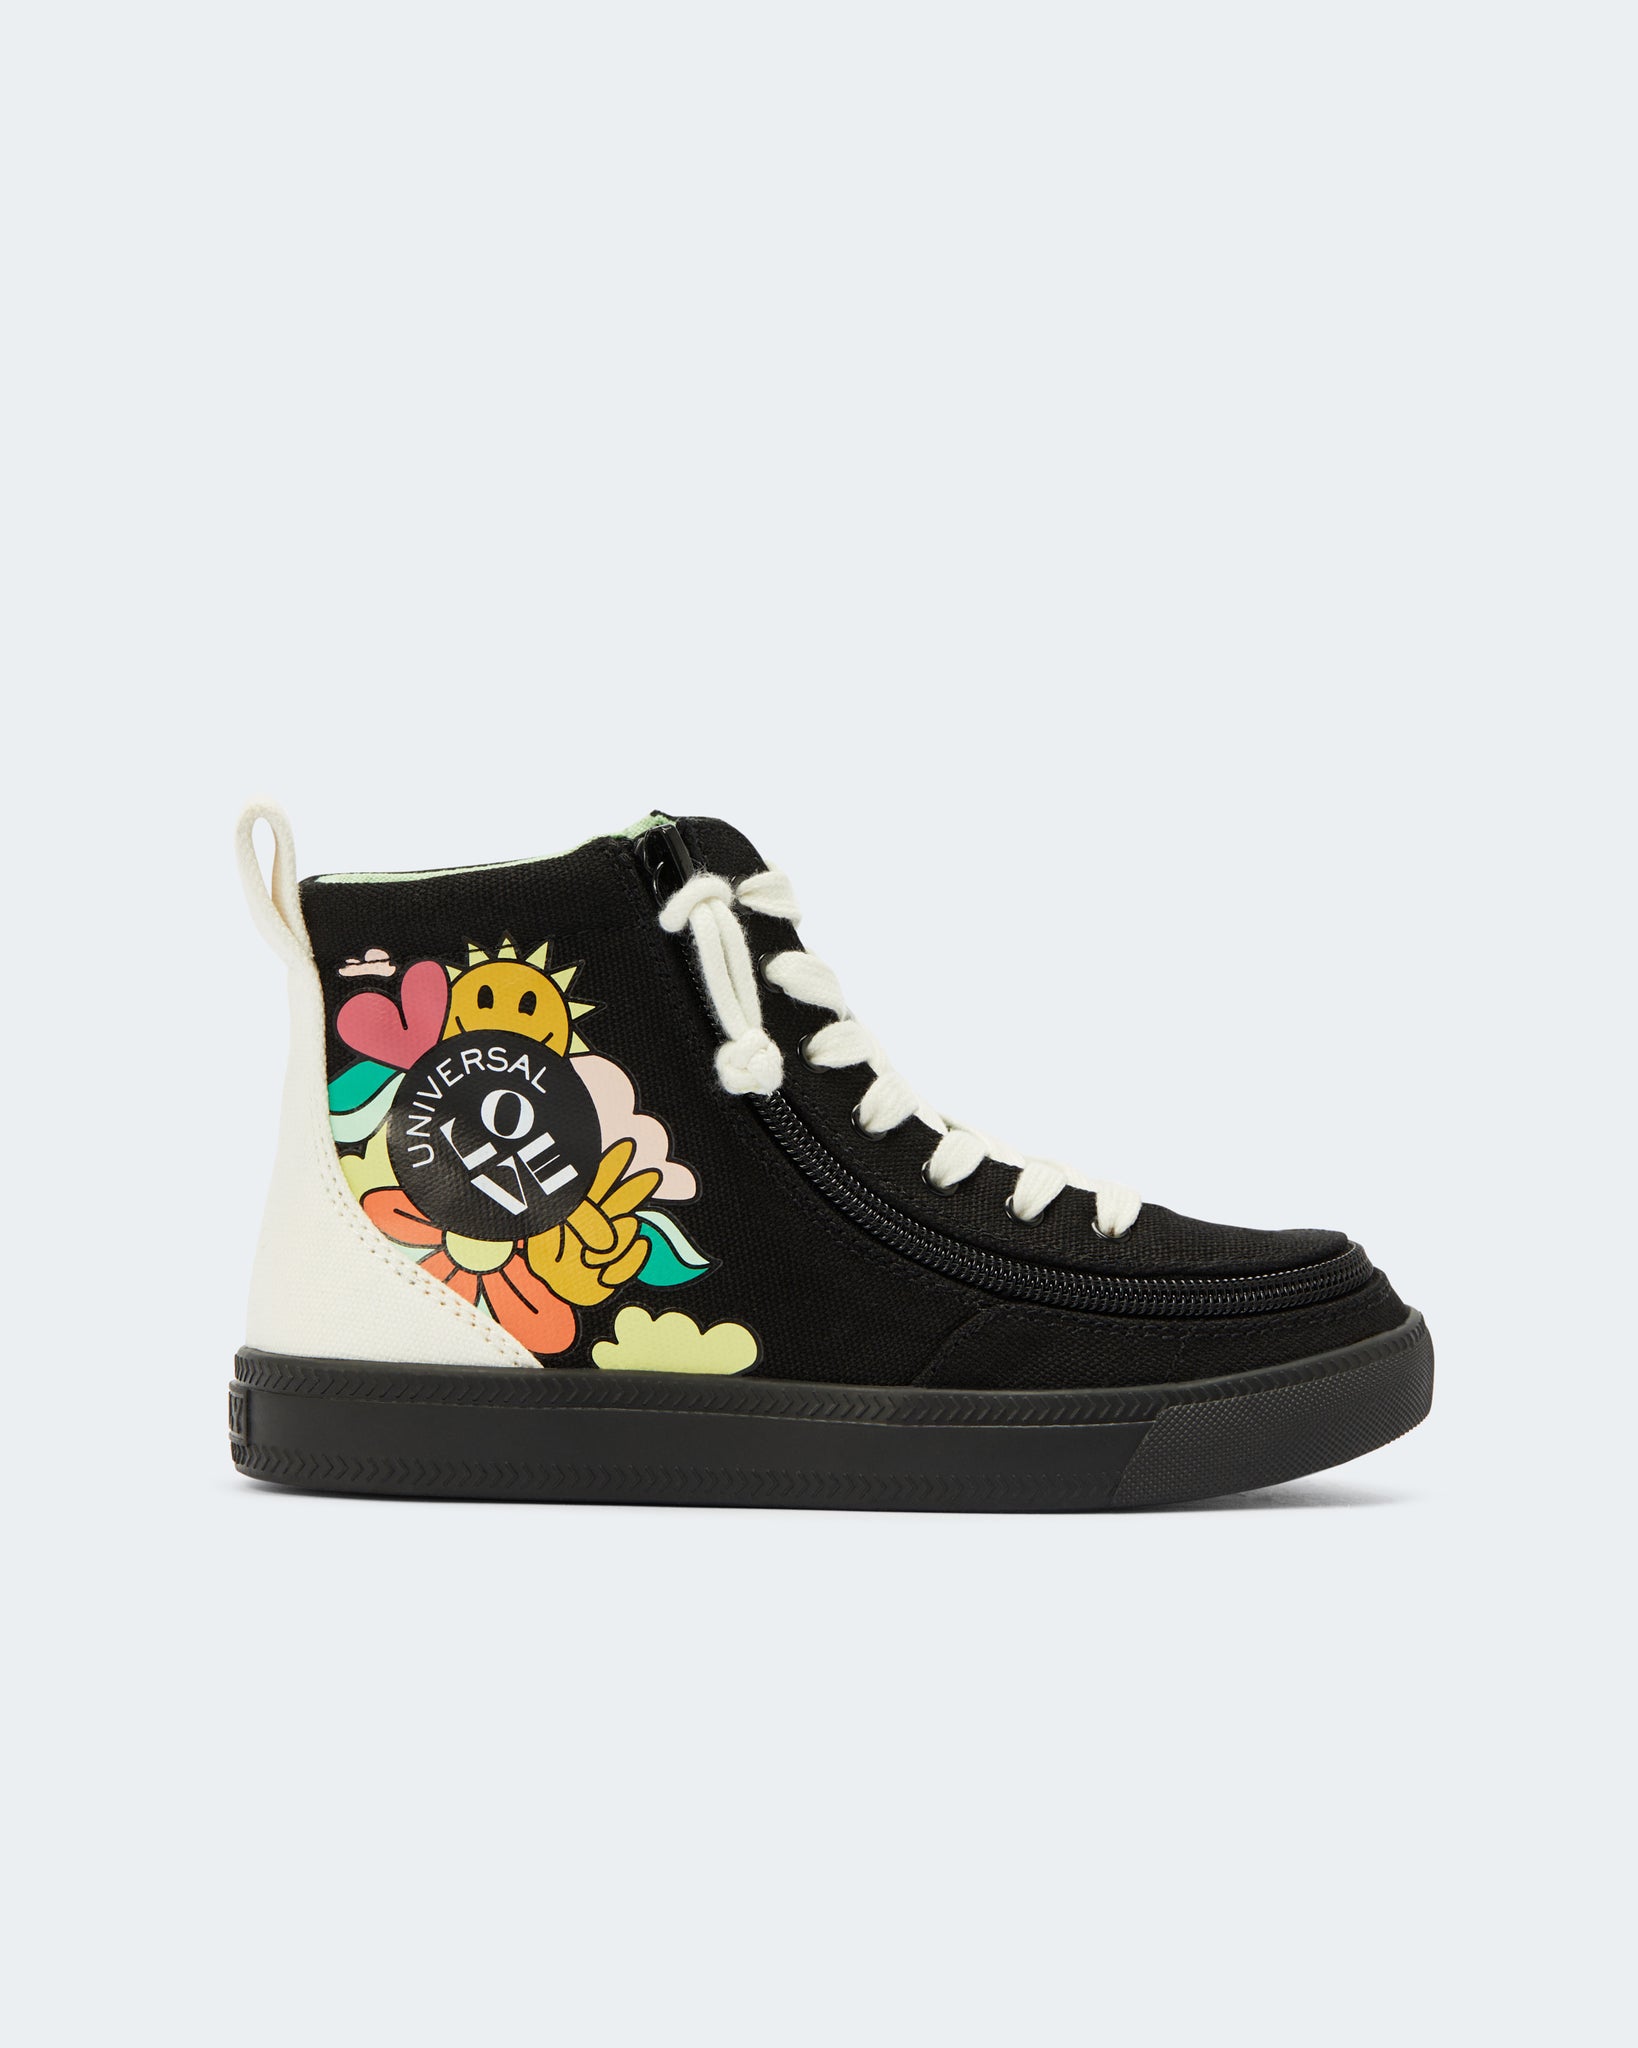 EH x Billy - Classic High Top (Toddler) - Universal Love Black